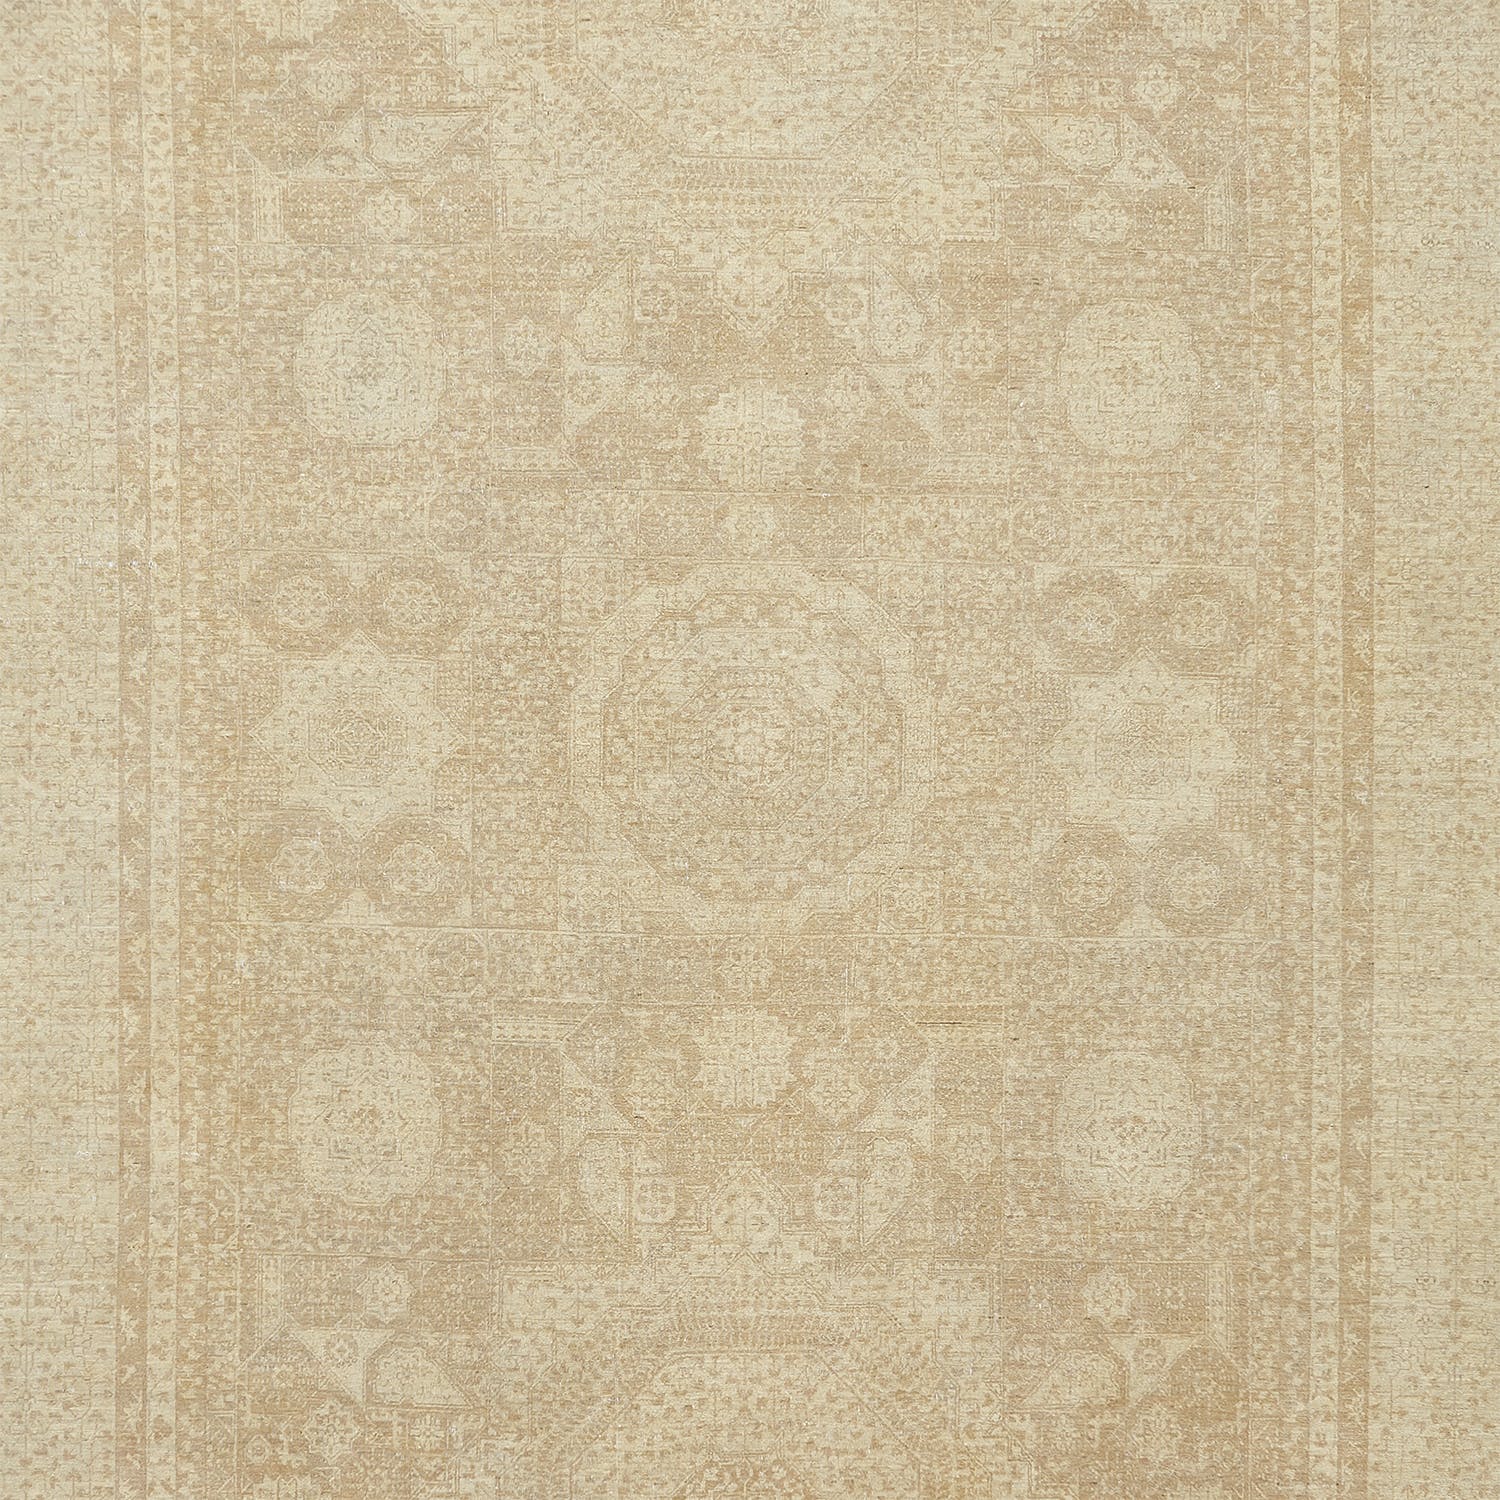 Intricate symmetrical pattern on neutral background evokes classical rug design.